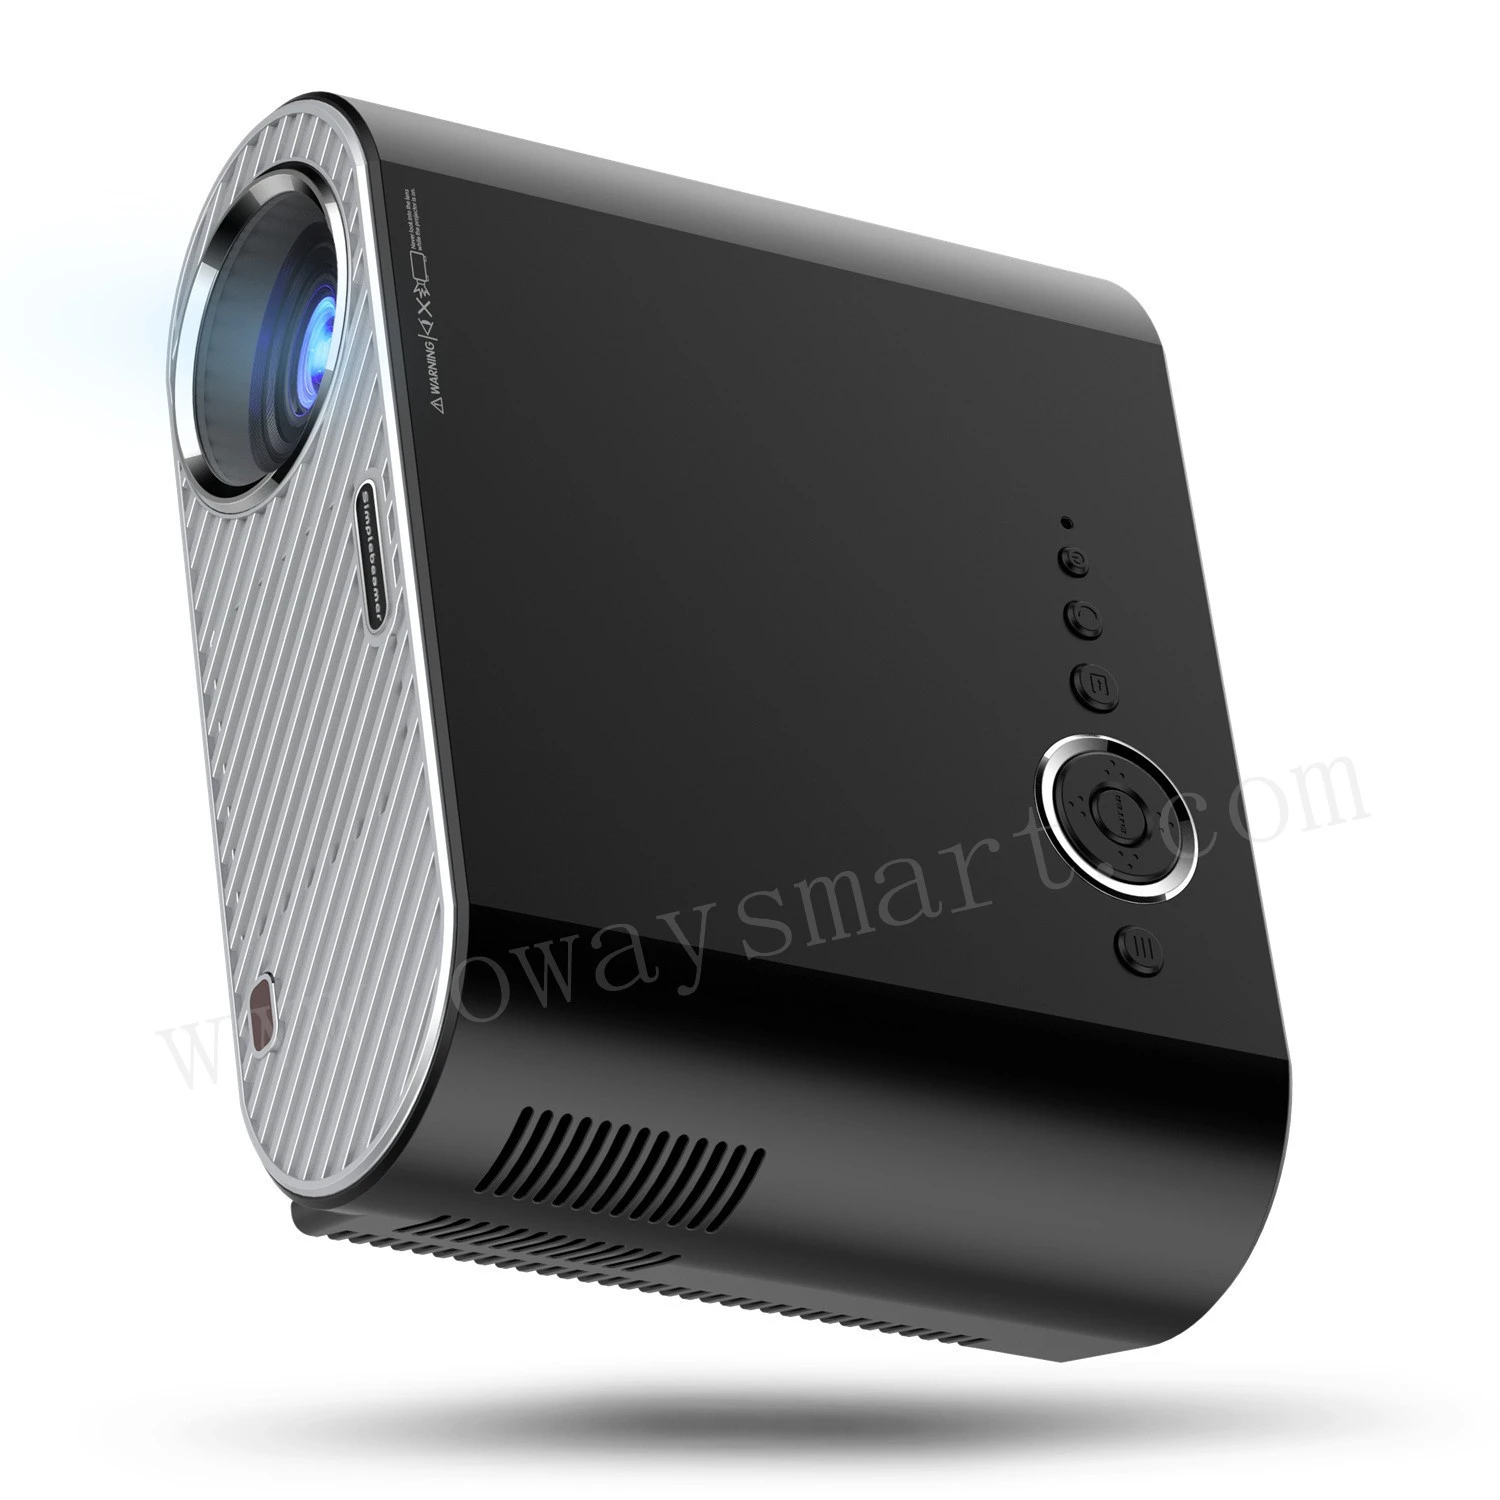 Vivid Display LCD Projector for family party and friend meeting